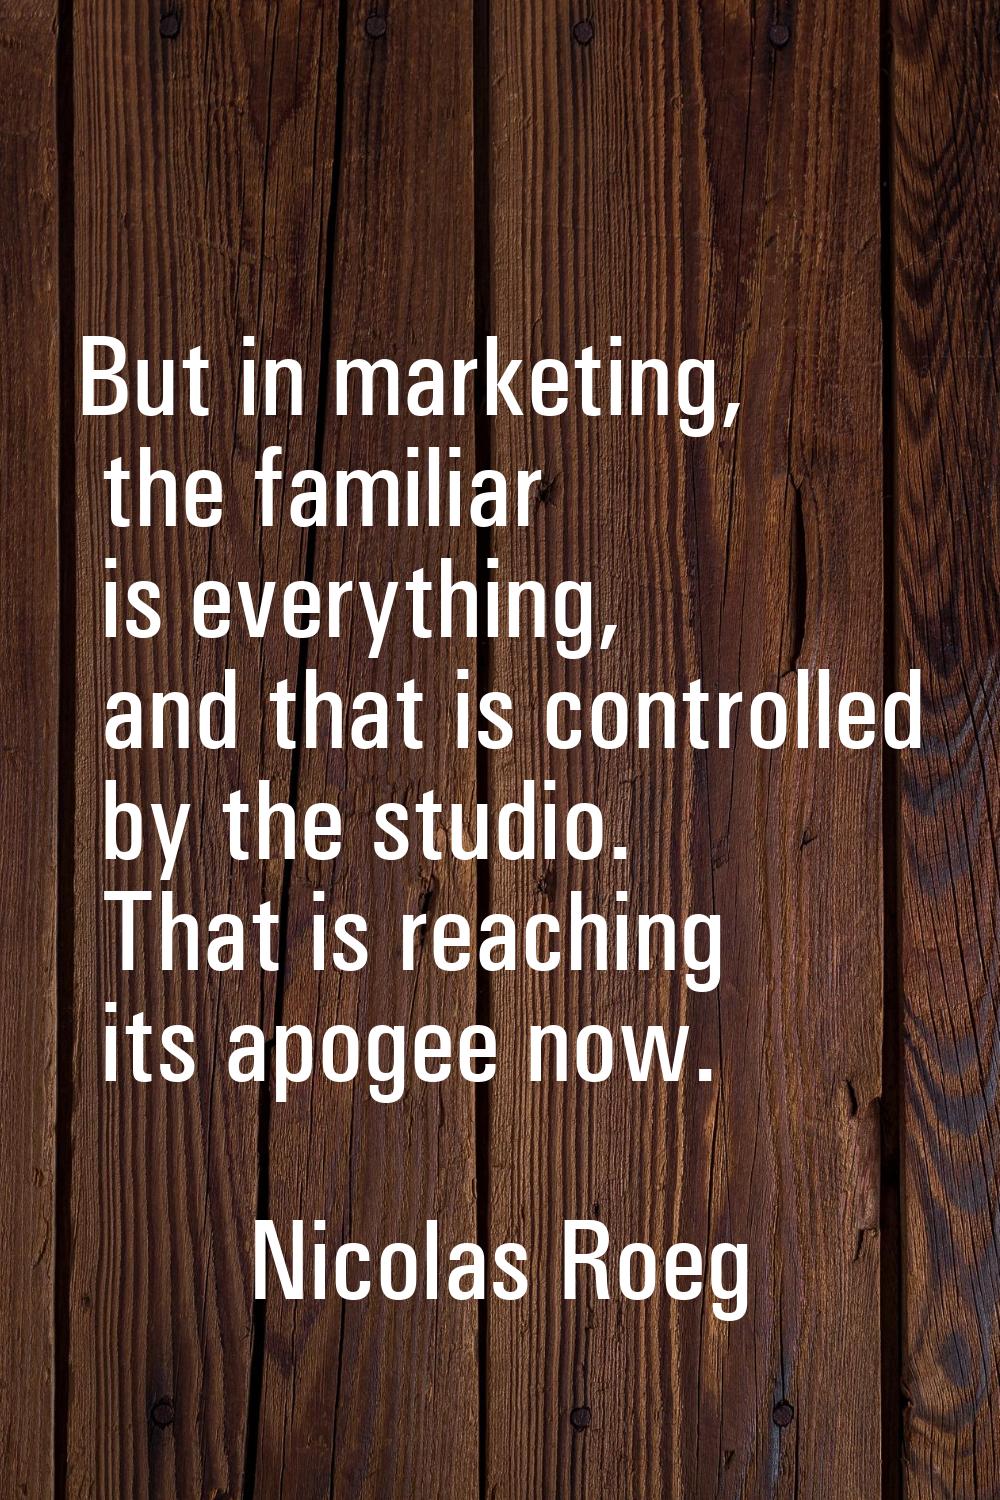 But in marketing, the familiar is everything, and that is controlled by the studio. That is reachin